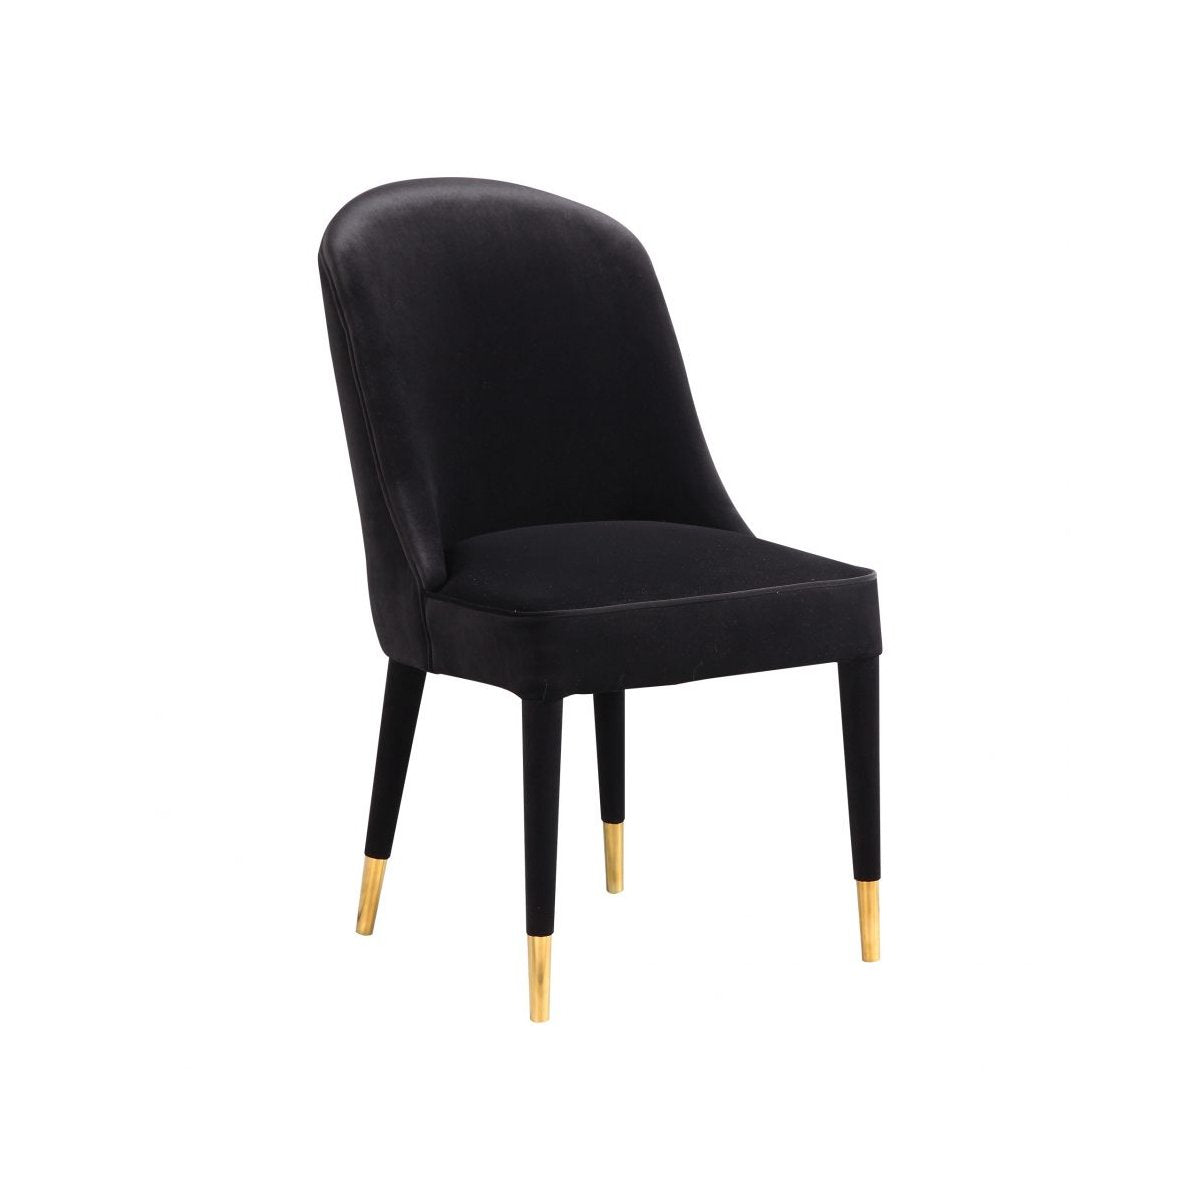 Load image into Gallery viewer, Liberty Dining Chair-M2 BlackDining Chairs Moe&amp;#39;s  Black   Four Hands, Burke Decor, Mid Century Modern Furniture, Old Bones Furniture Company, Old Bones Co, Modern Mid Century, Designer Furniture, https://www.oldbonesco.com/
